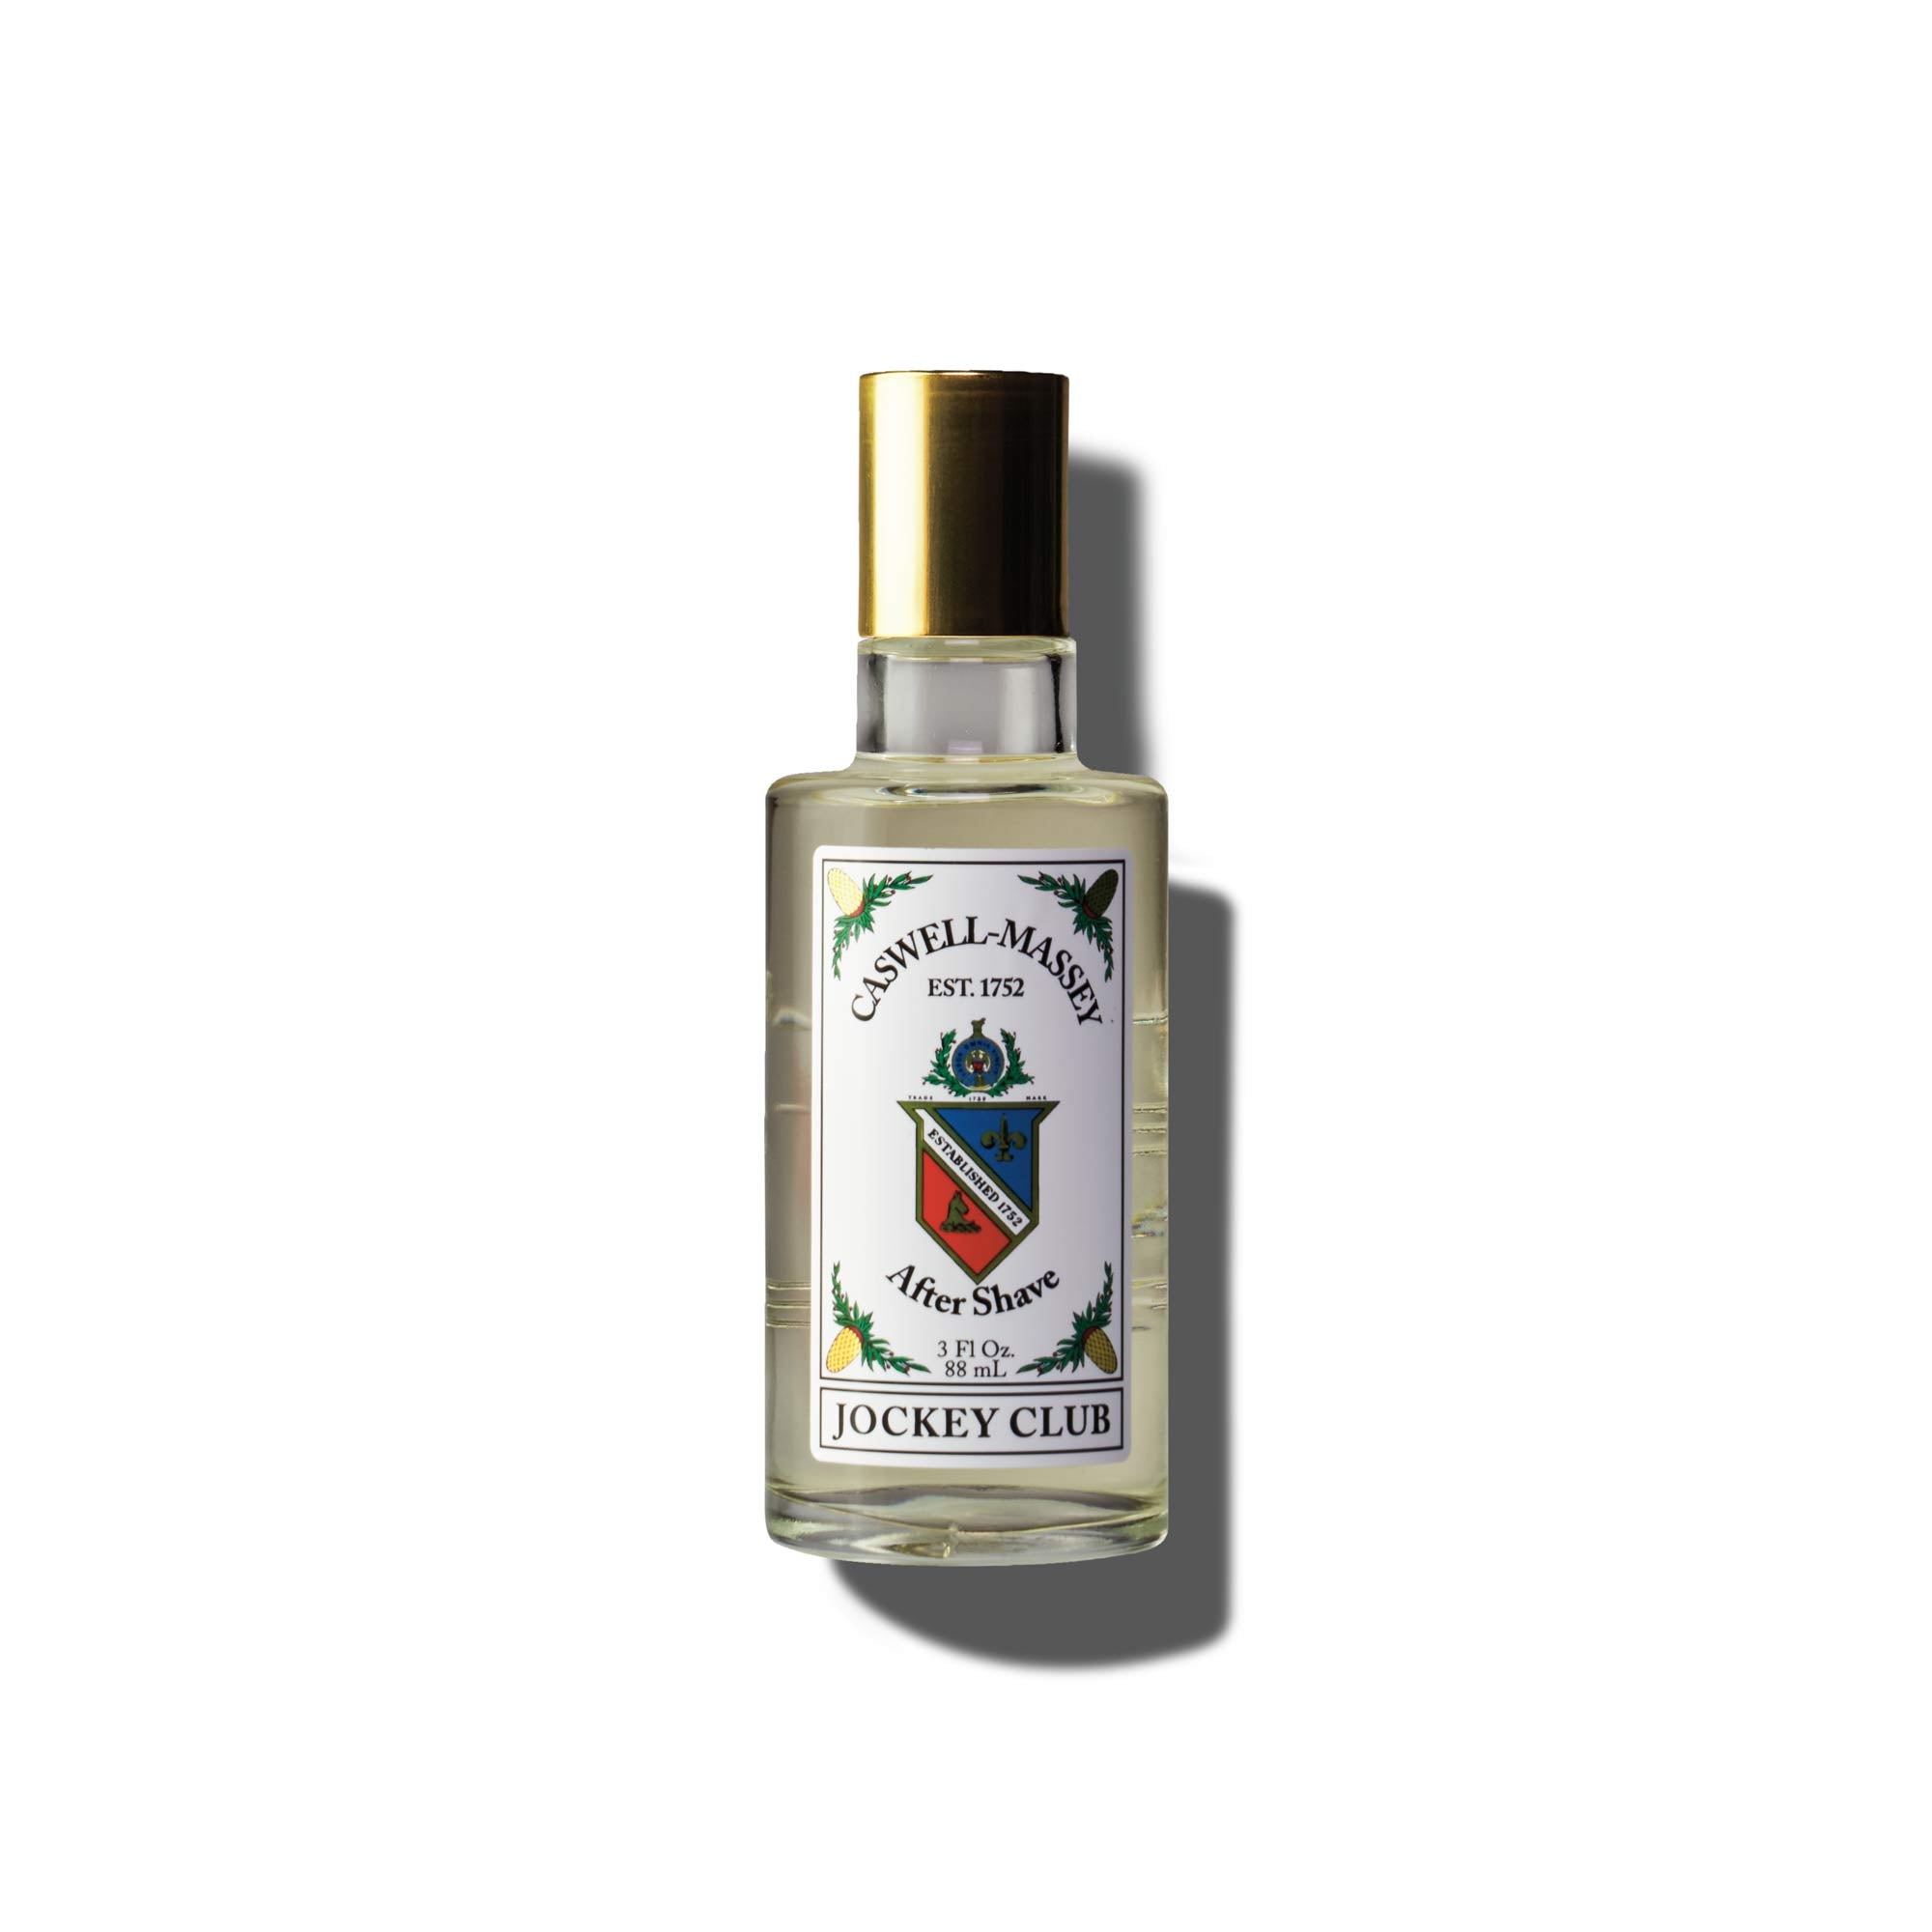 Jockey Club Aftershave Aftershave Caswell-Massey®   